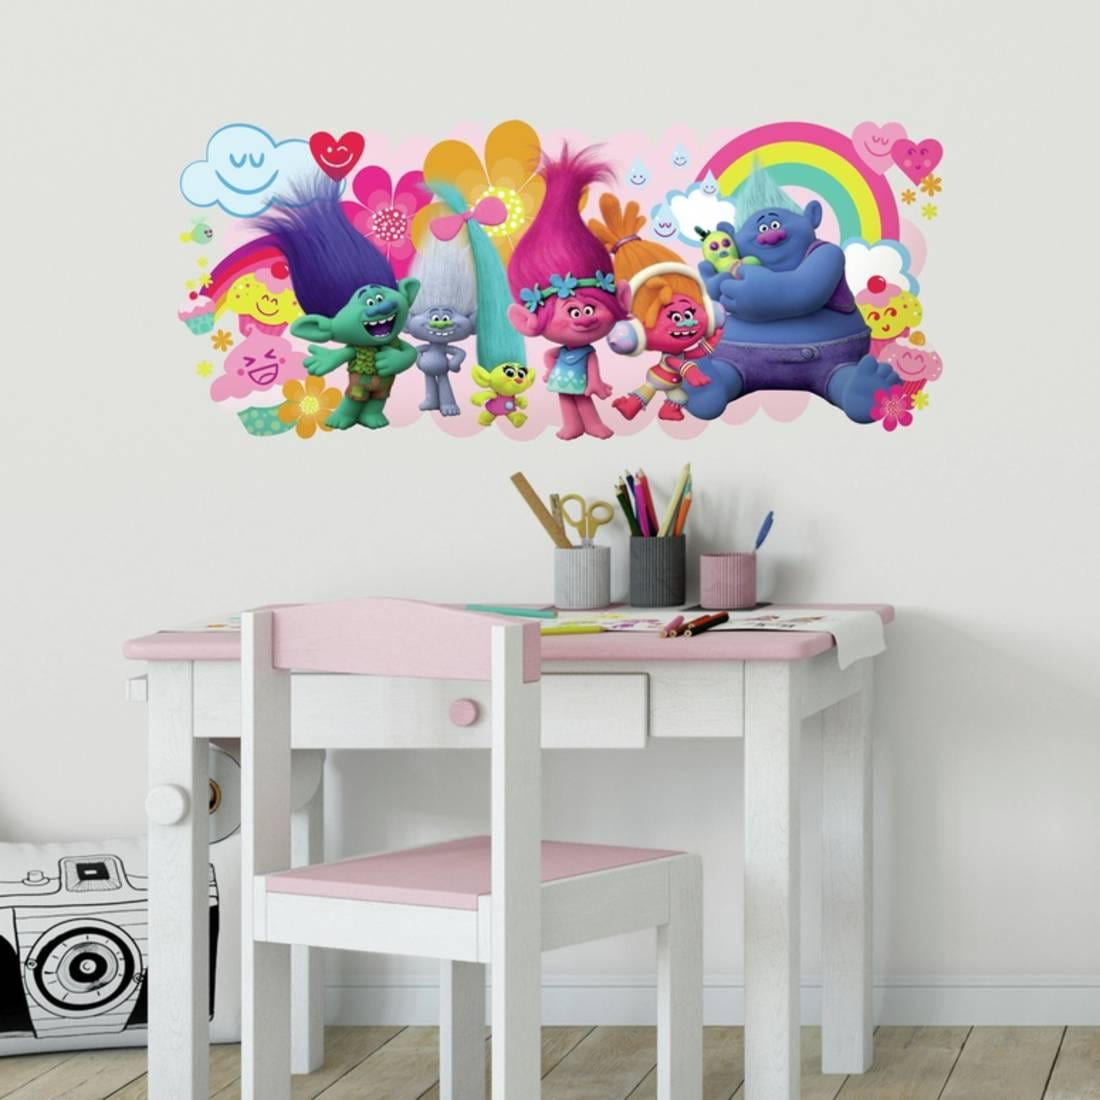 Light Switch Covers Home Decor Outlet Trolls 3 